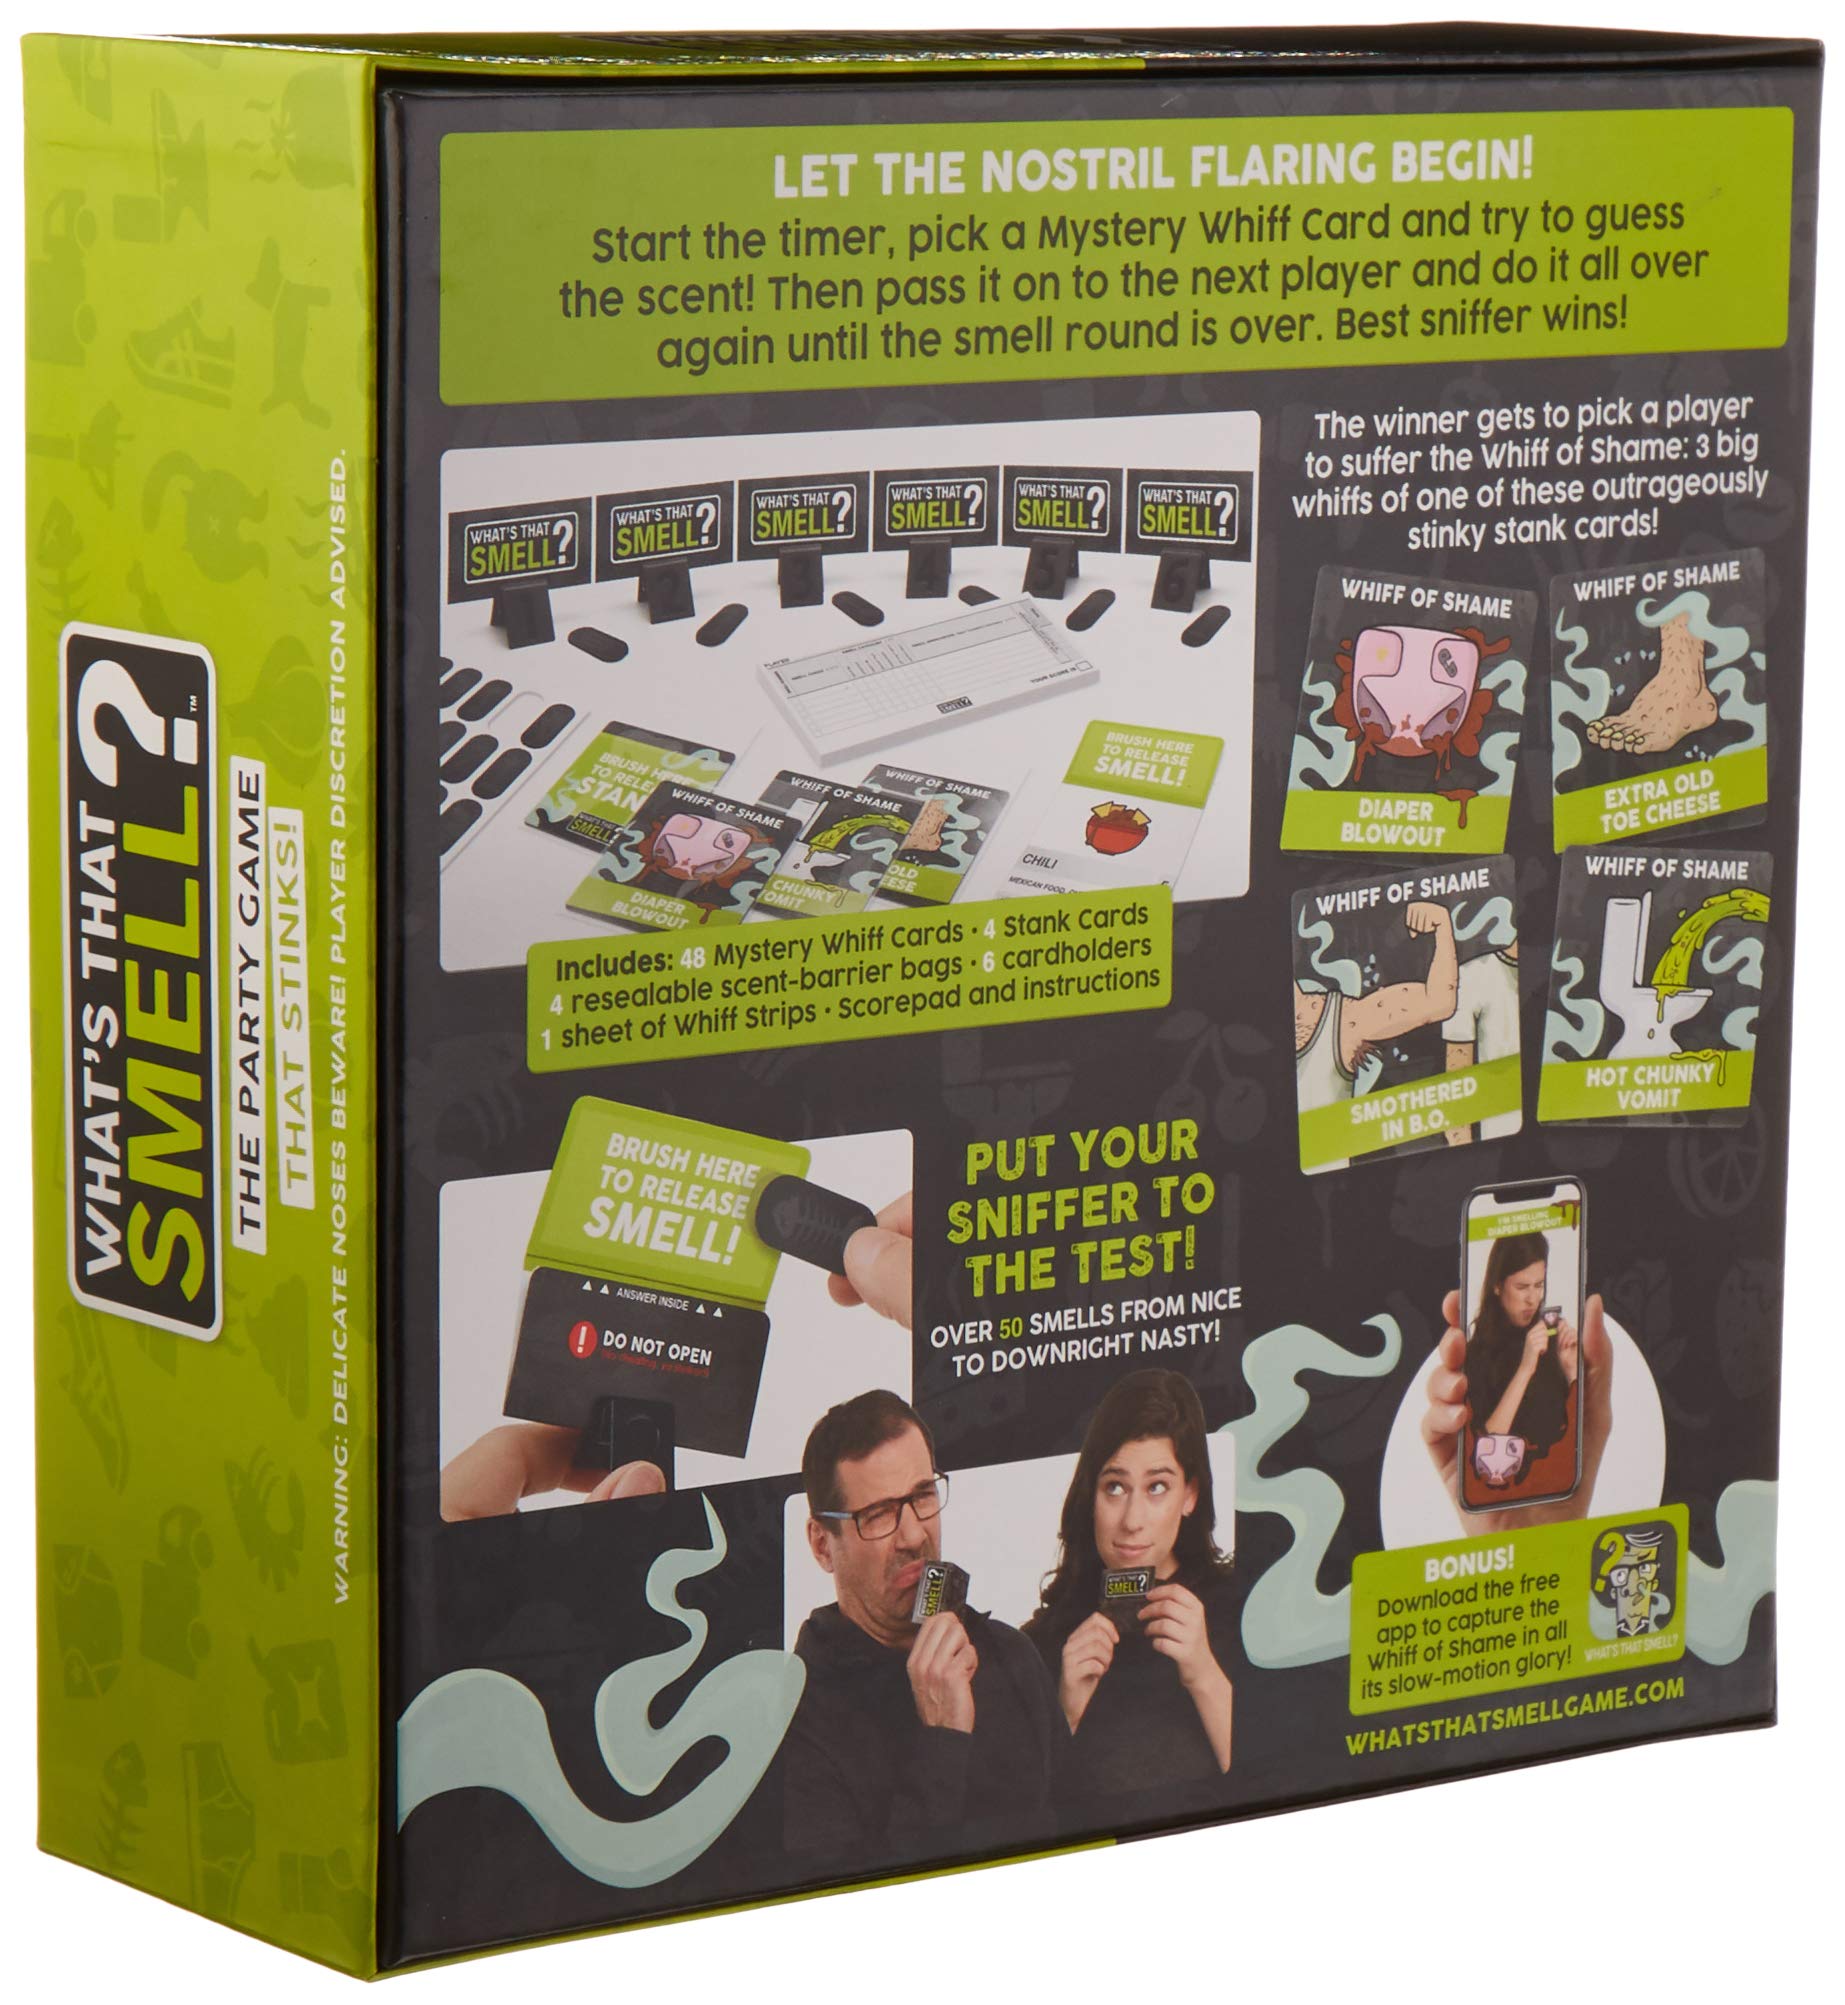 WowWee What's That Smell? The Party Game That Stinks - Scent Guessing Game For Adults & Families